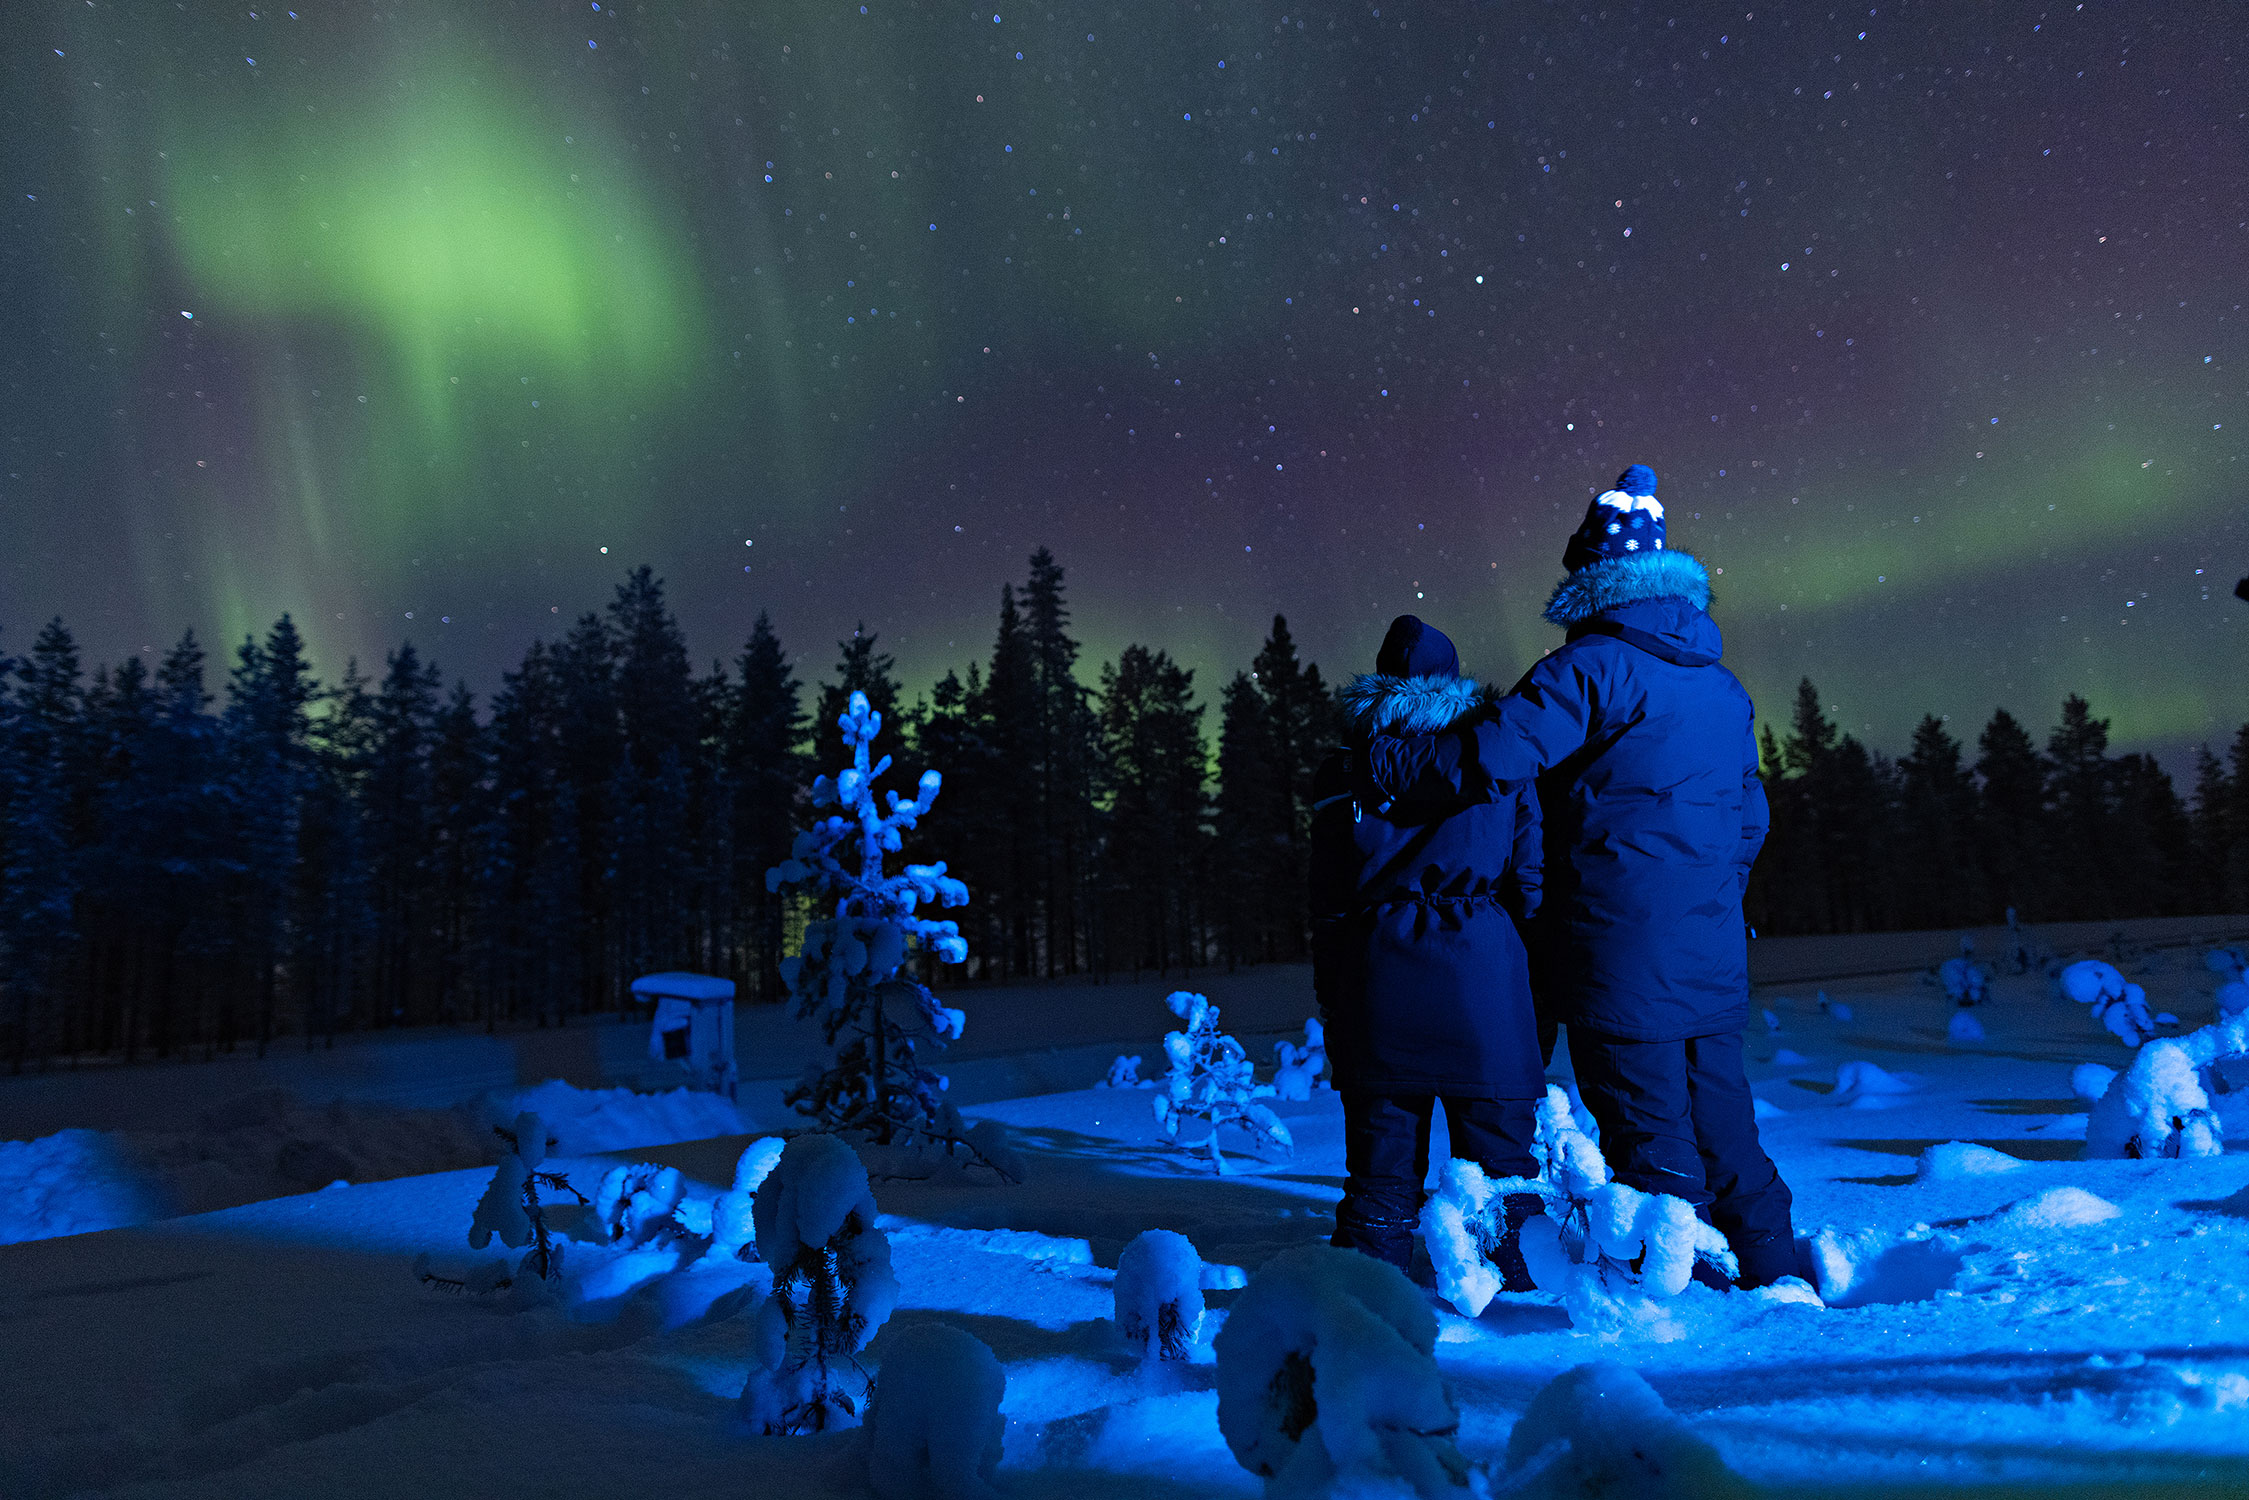 If you are lucky, you might even see the auroras during the autumn months.